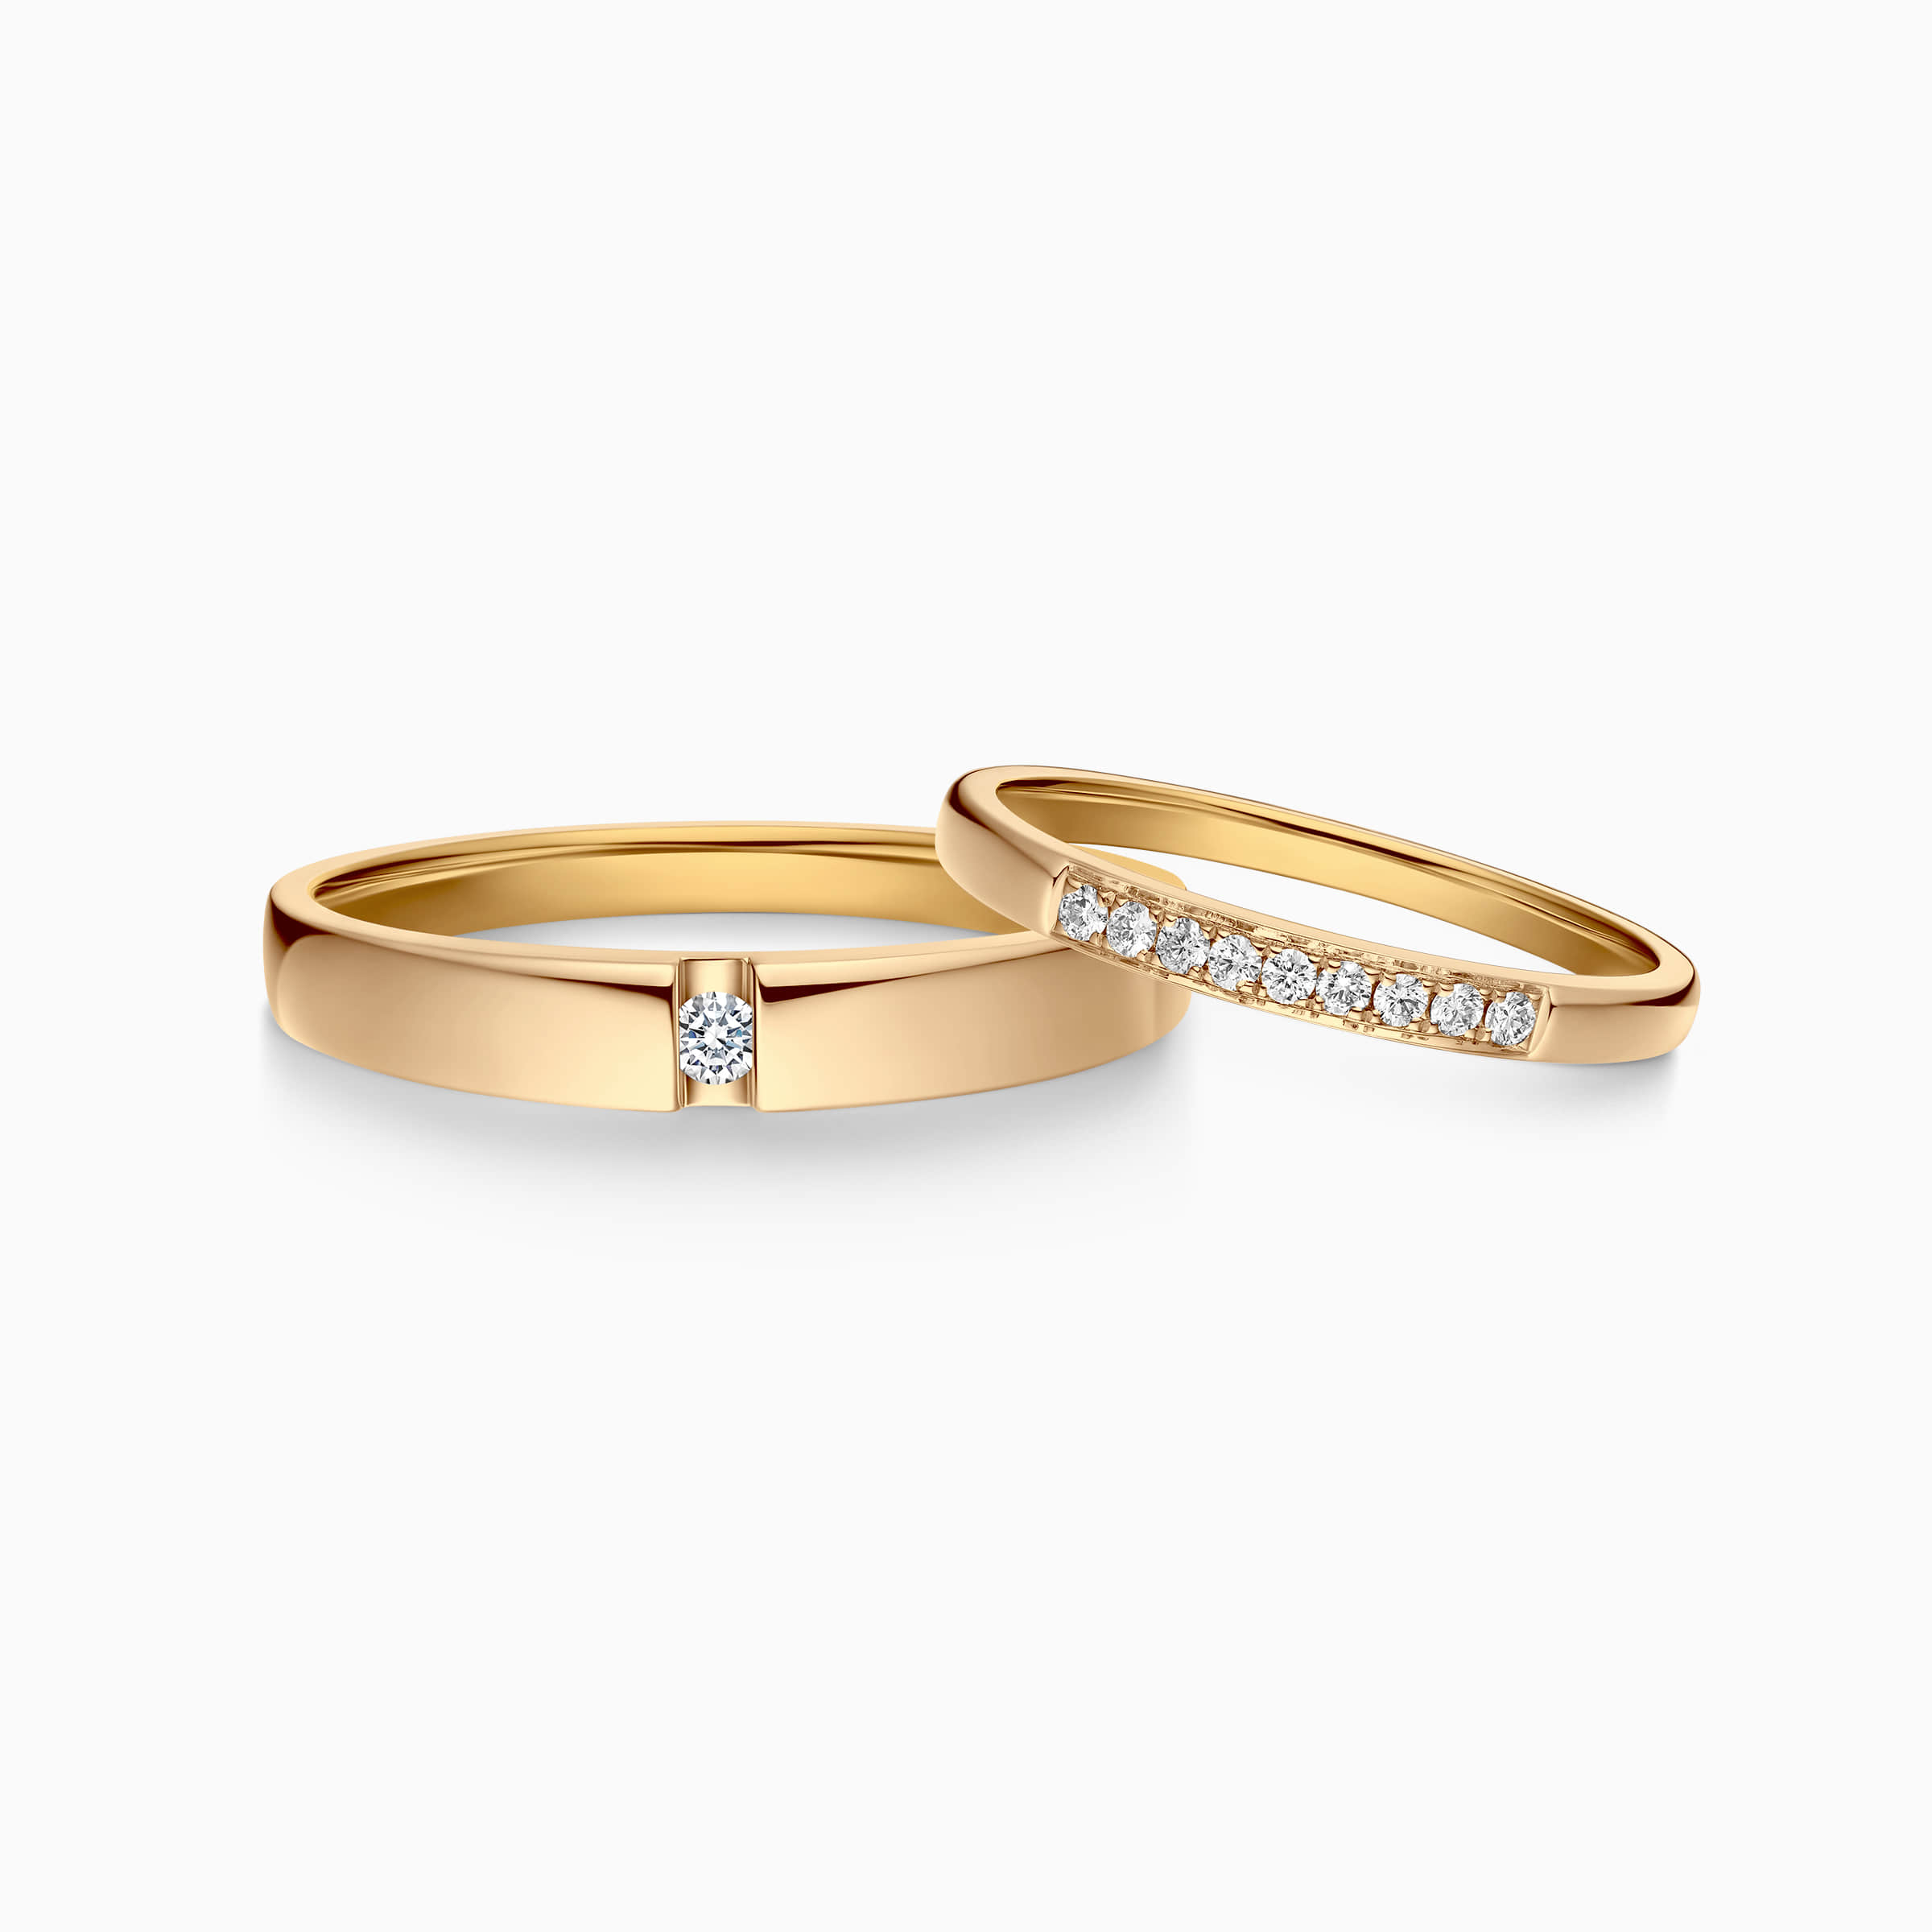 Buy 2 Rings His and Hers Couple Rings Bridal Sets Yellow Gold Filled Heart  Cz Womens Wedding Ring Sets Man Wedding Bands at Amazon.in